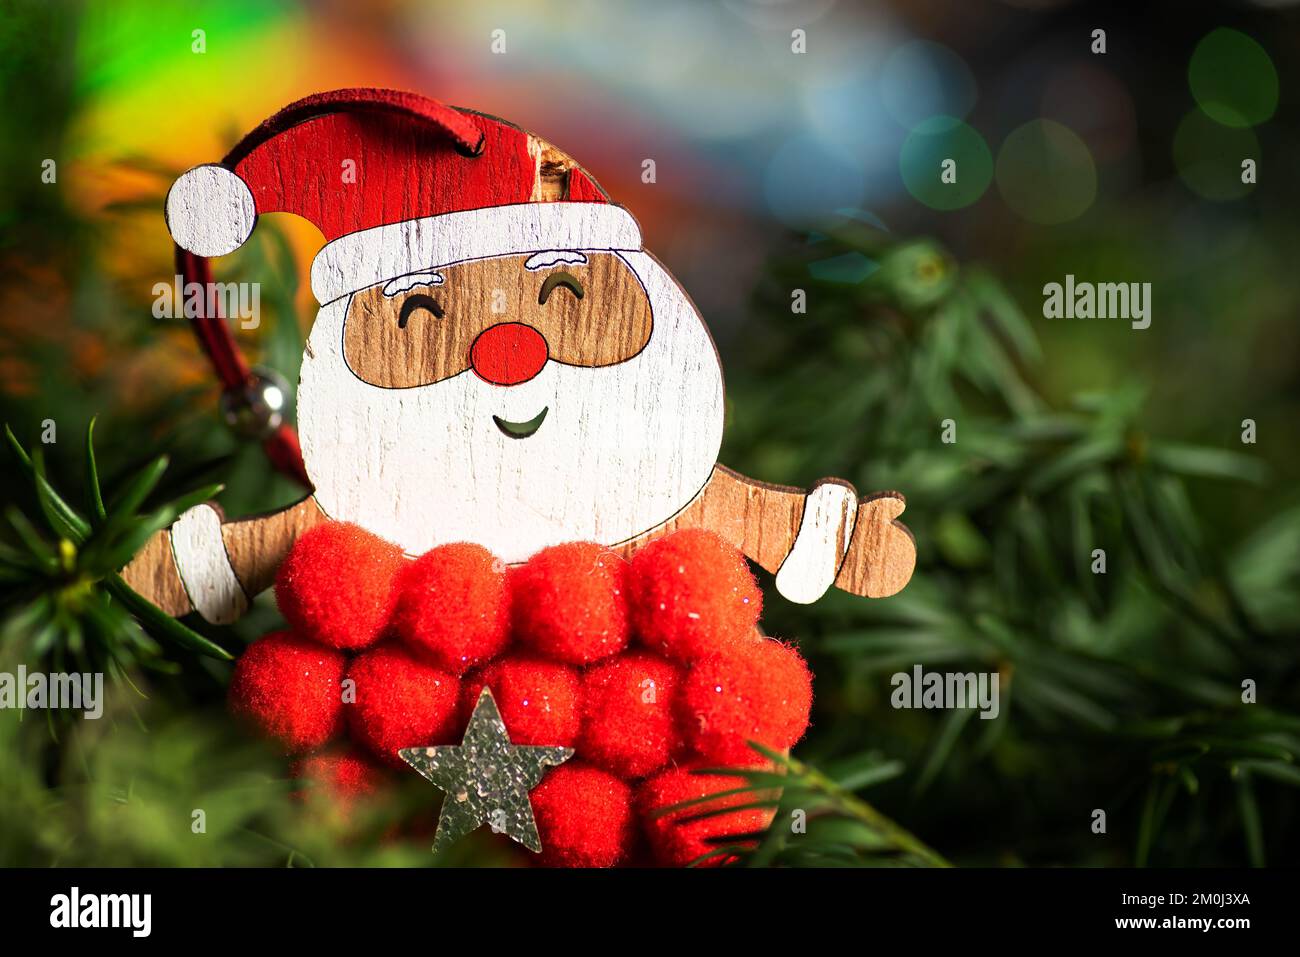 Santa Claus toy and festive winter holiday decoration and the Christmas tree with shiny fairy lights in the background Stock Photo